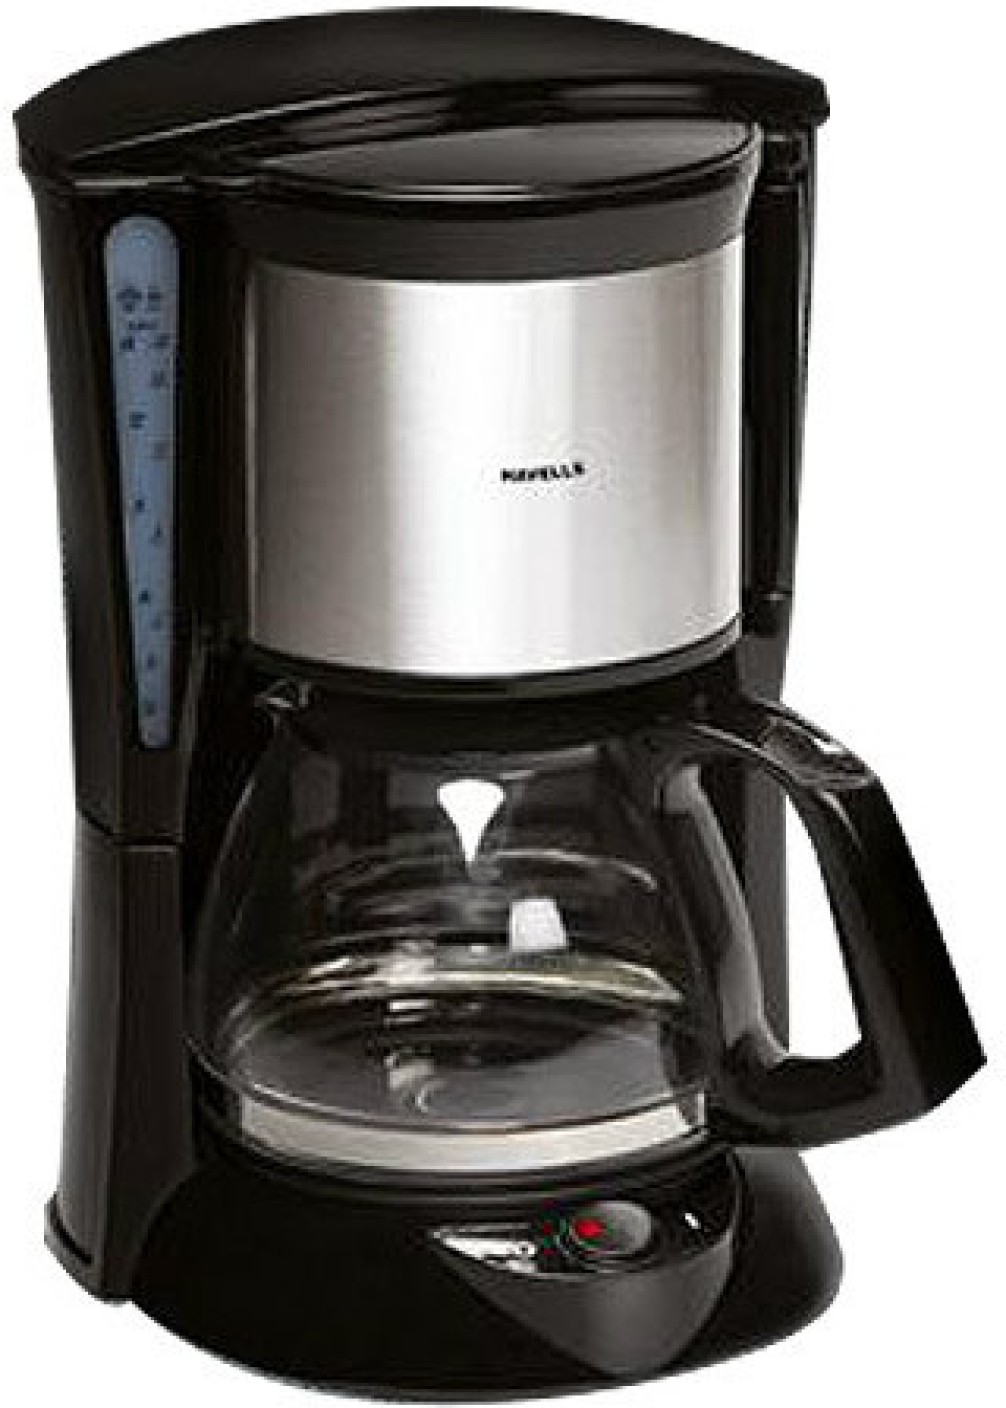 Havells Drip Cafe 12 Coffee Maker Price in India - Buy Havells Drip